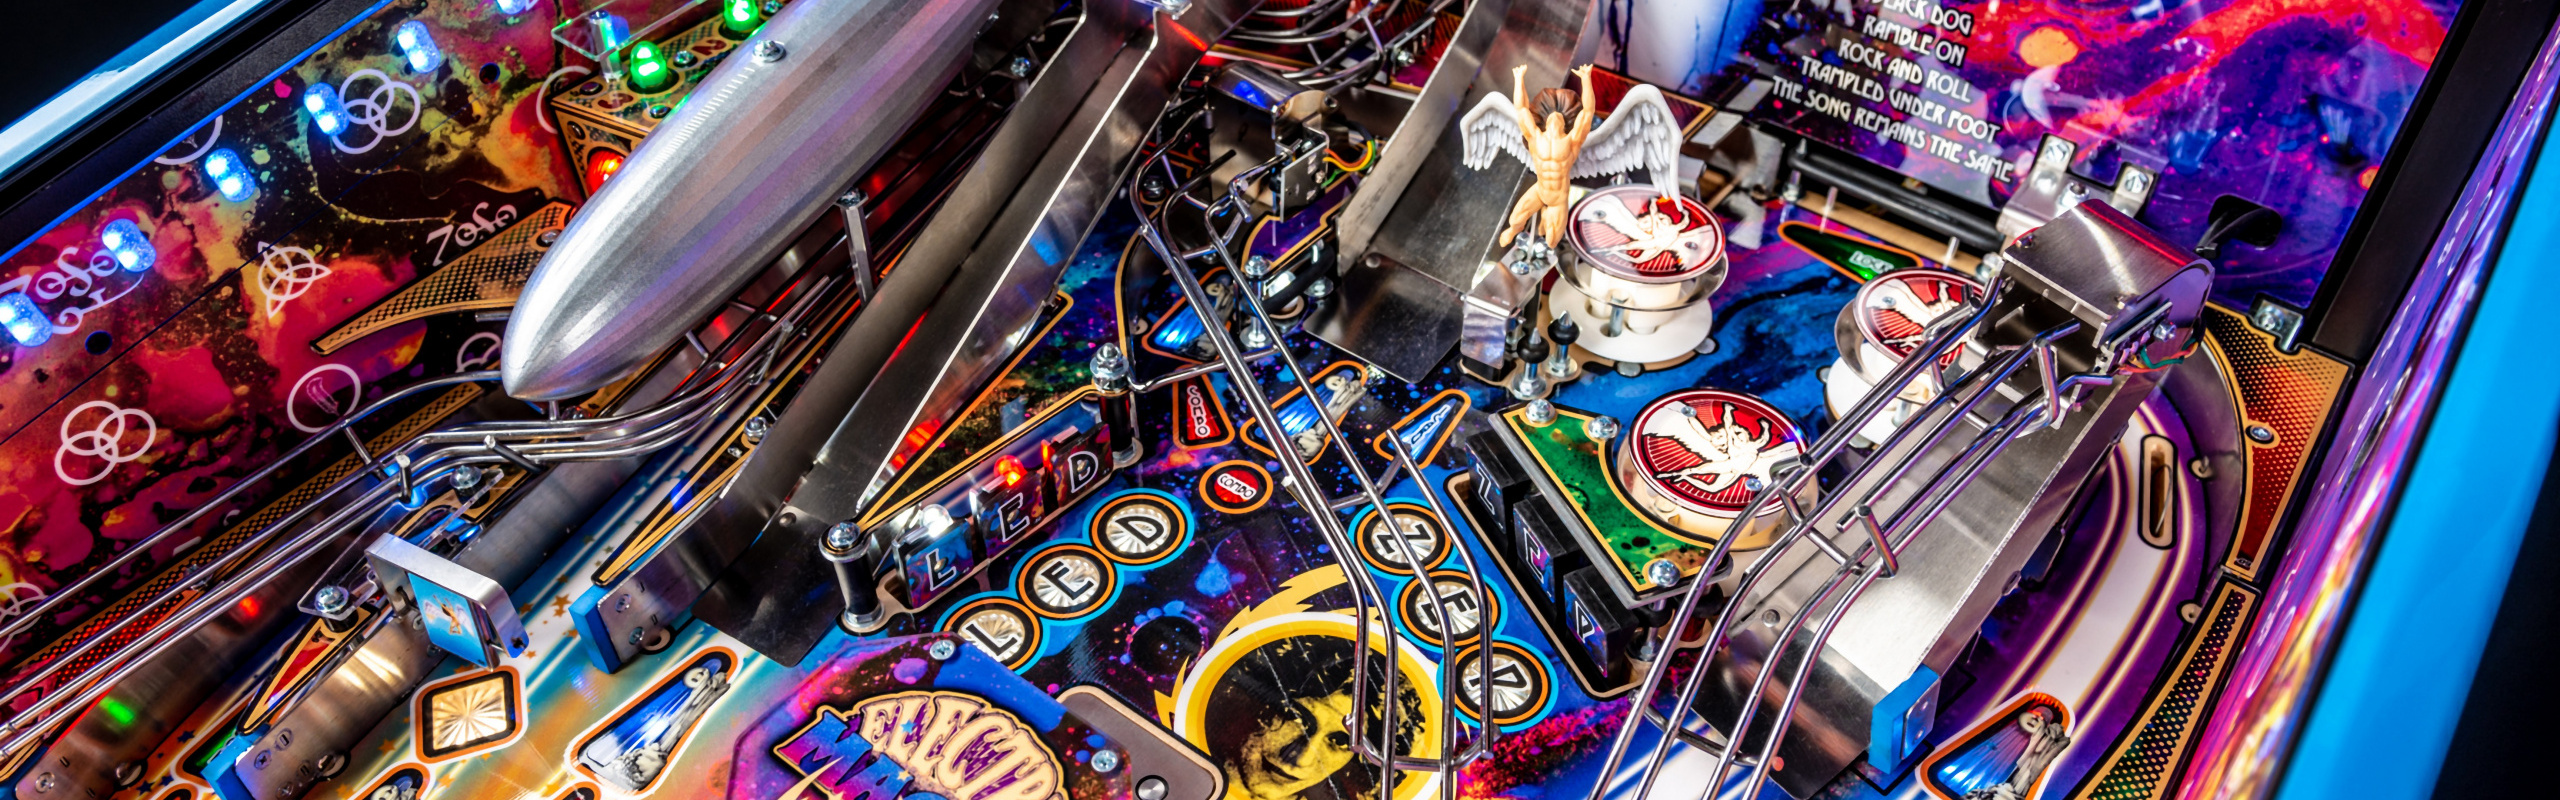 Stern Pinball showcases new games at CES 2021